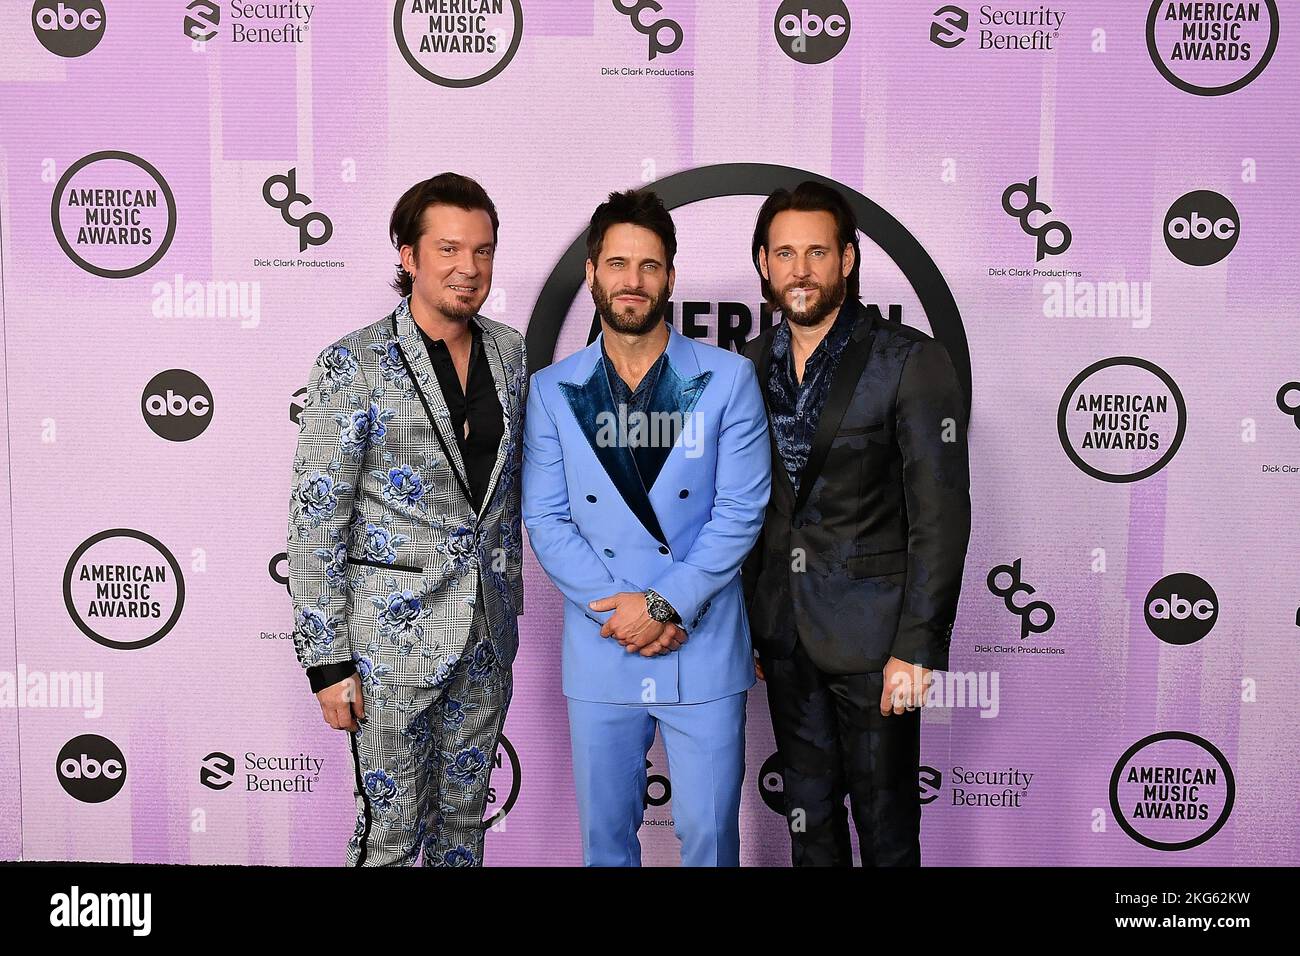 Los Angeles, USA. 20th Nov, 2022. Josh McSwain, Matt Thomas and Scott Thomas of Parmalee attend the 2022 American Music Awards at Microsoft Theater on November 20, 2022 in Los Angeles, California. Photo: Casey Flanigan/imageSPACE Credit: Imagespace/Alamy Live News Stock Photo